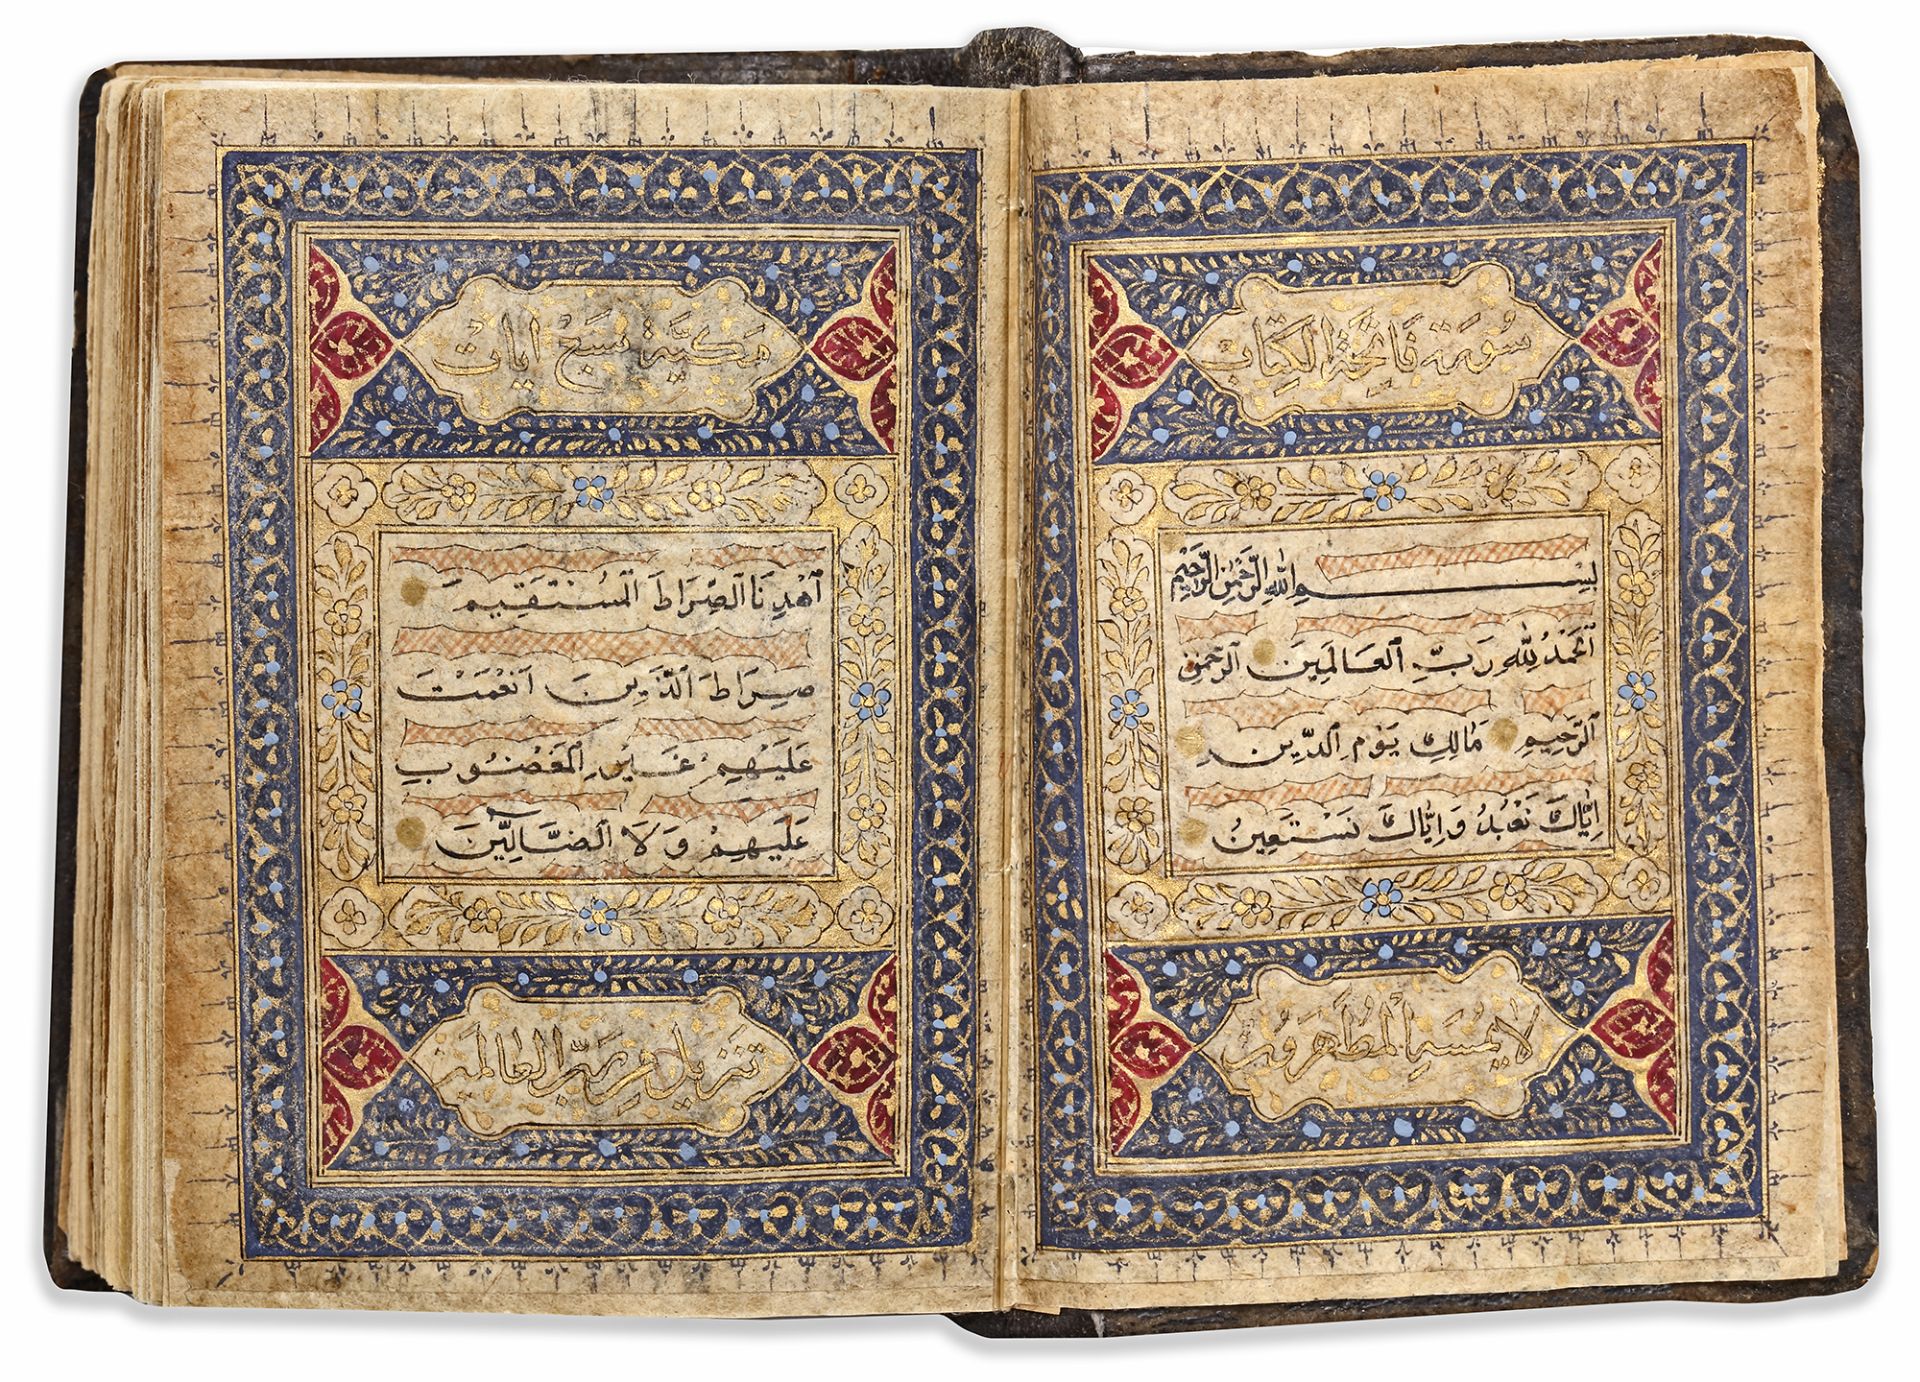 AN OTTOMAN MINIATURE QURAN COPIED BY MAHMOUD SULTANI IN 846 AH/1442 AD